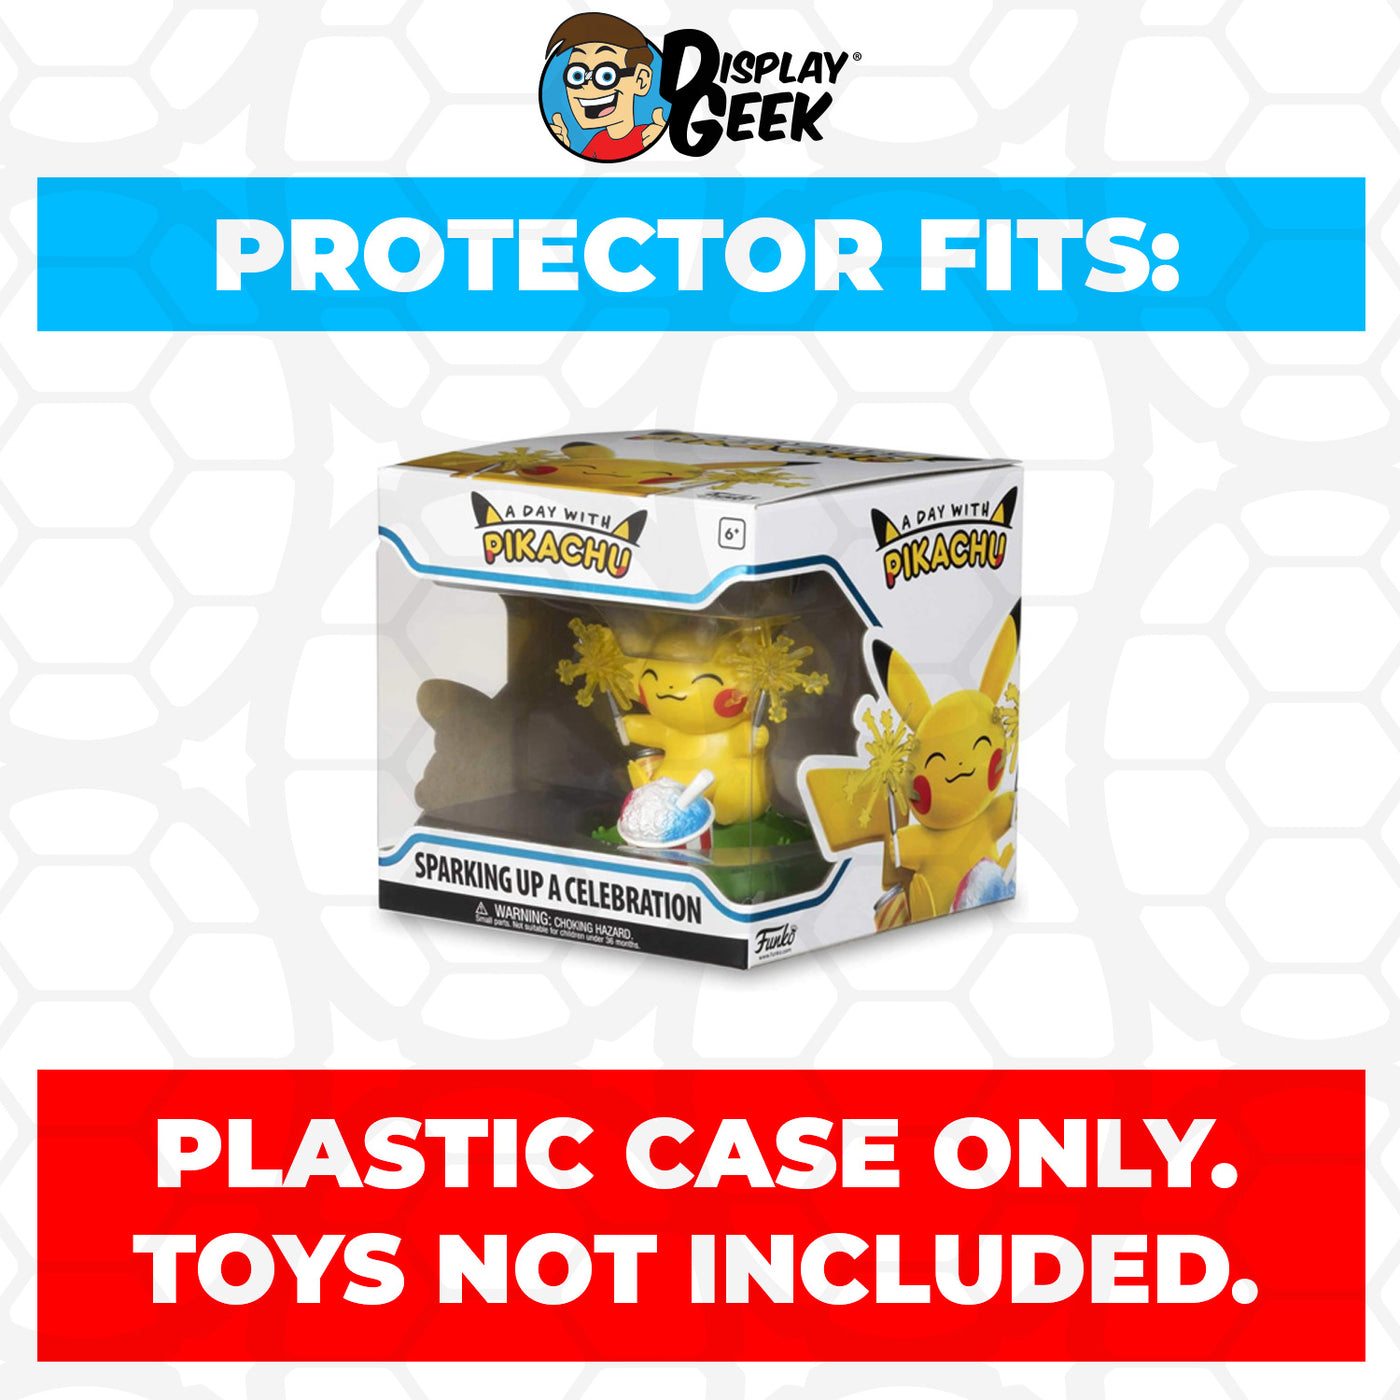 Pop Protector for Sparking up a Celebration Funko A Day with Pikachu on The Protector Guide App by Display Geek